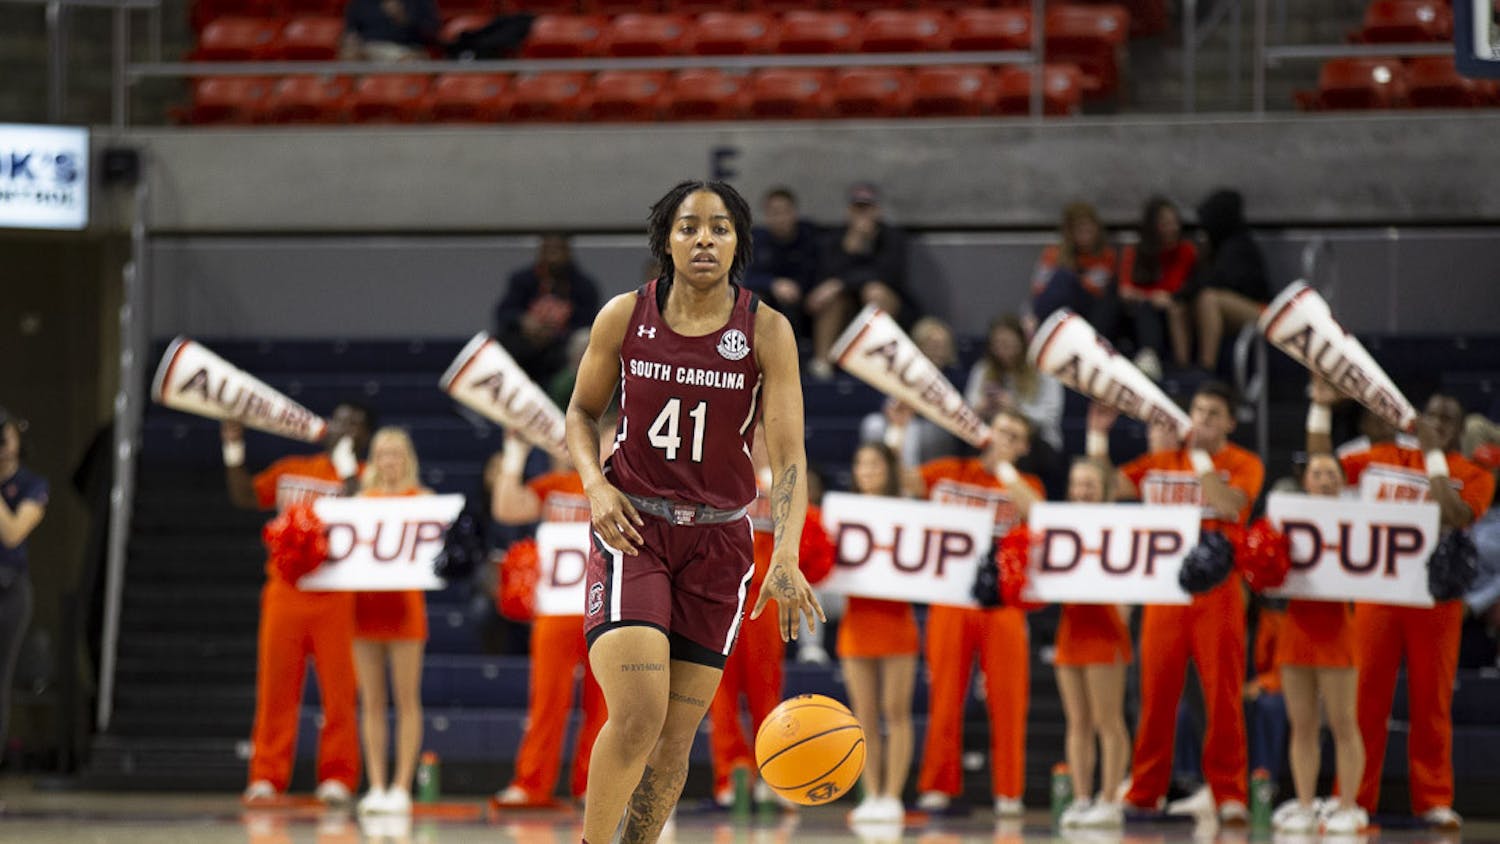 The South Carolina women's basketball team took on the Auburn Tigers on Feb. 9, 2023, beating them 83-48. This improves the Gamecocks to a 24-0 record overall and 11-0 in the SEC. The win also made program history, setting a program record with the first 30-game win streak in program history. The Gamecocks will return home and play No. 3 LSU on Feb. 12, 2023.&nbsp;